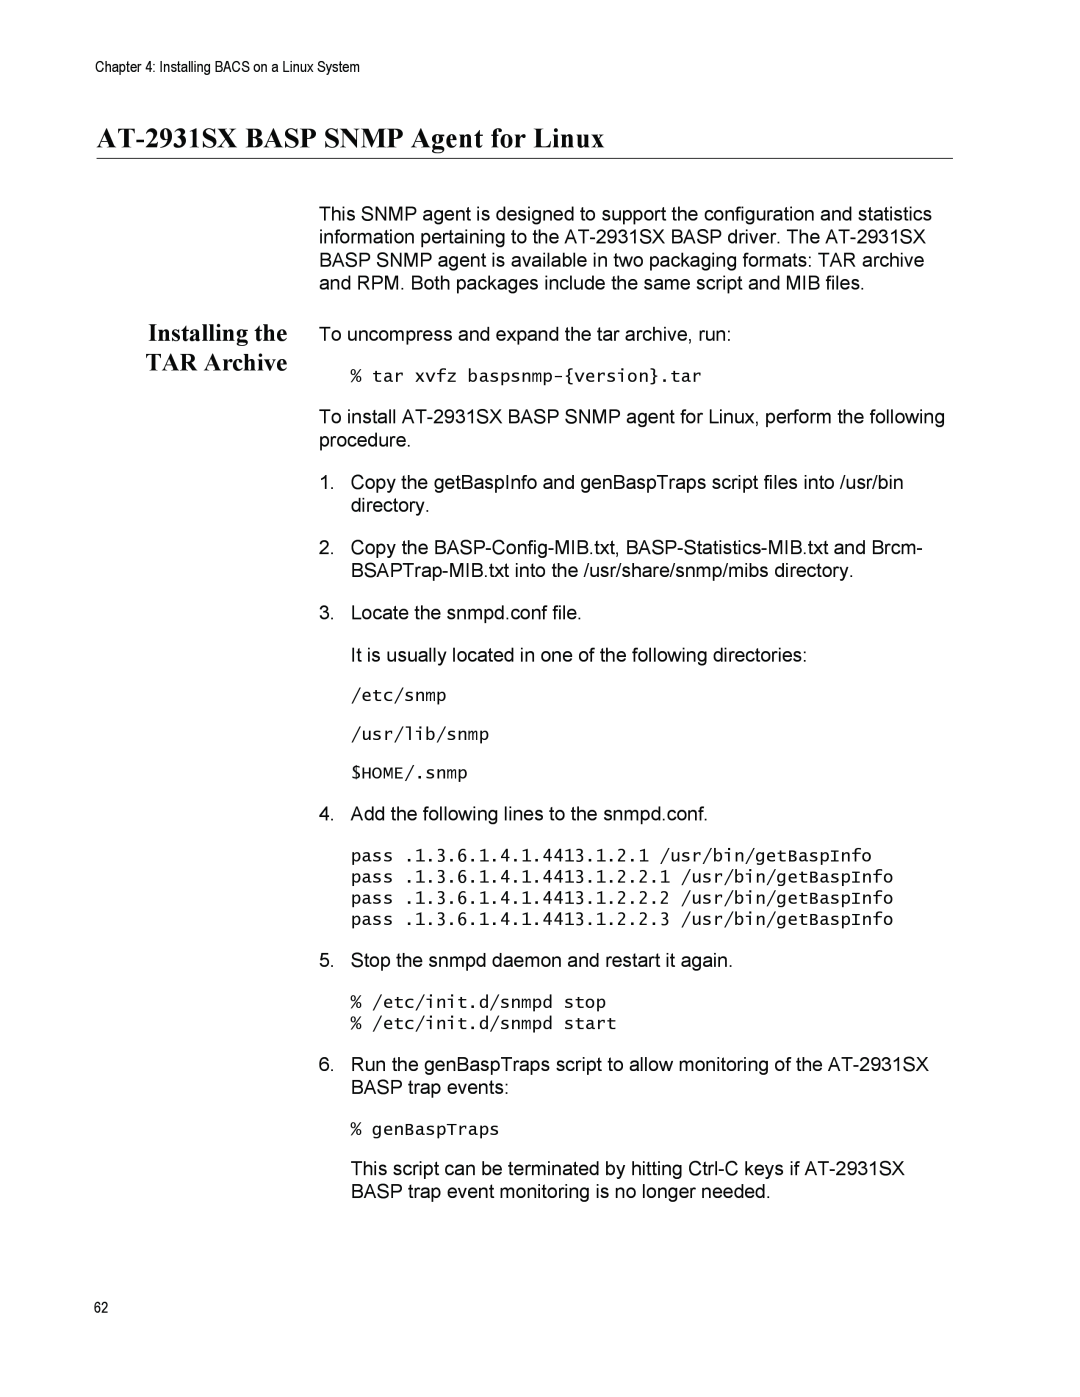 Allied Telesis manual AT-2931SX BASP SNMP Agent for Linux, Installing the TAR Archive 